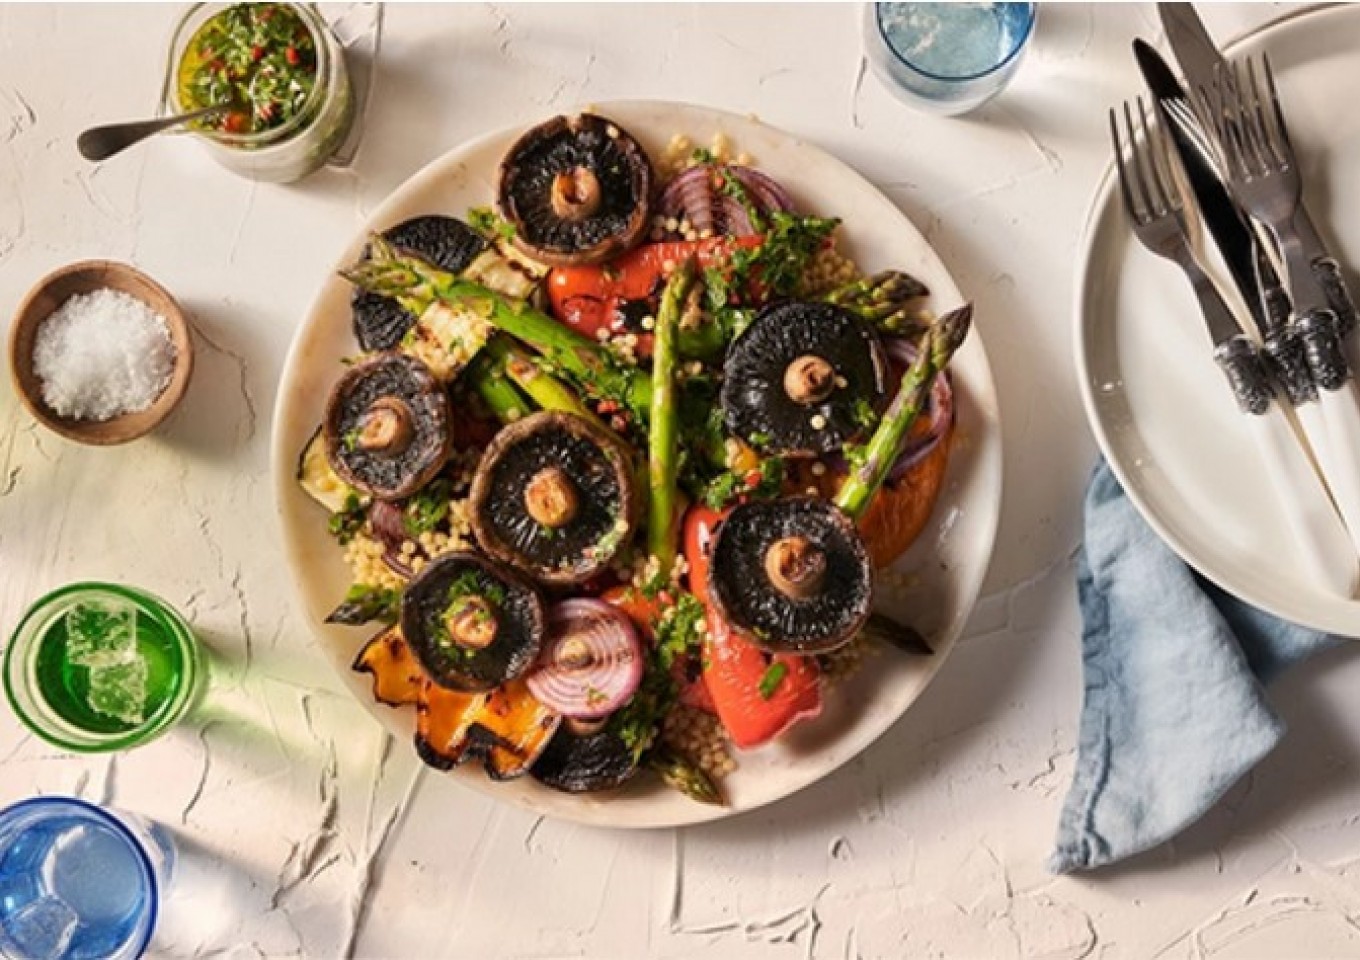 Warm Summer Grilled Vege Salad with Chimichurri Dressing